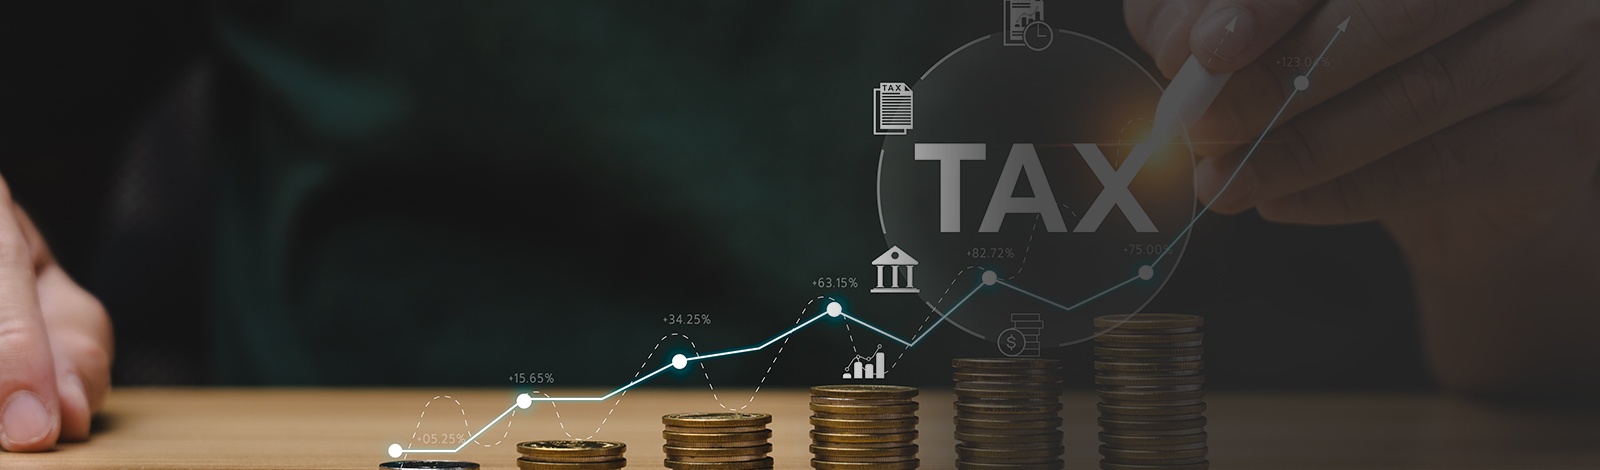 Offering personalized tax services for business owners in St. Catharines, Mississauga, Whitby, and Niagara Falls.